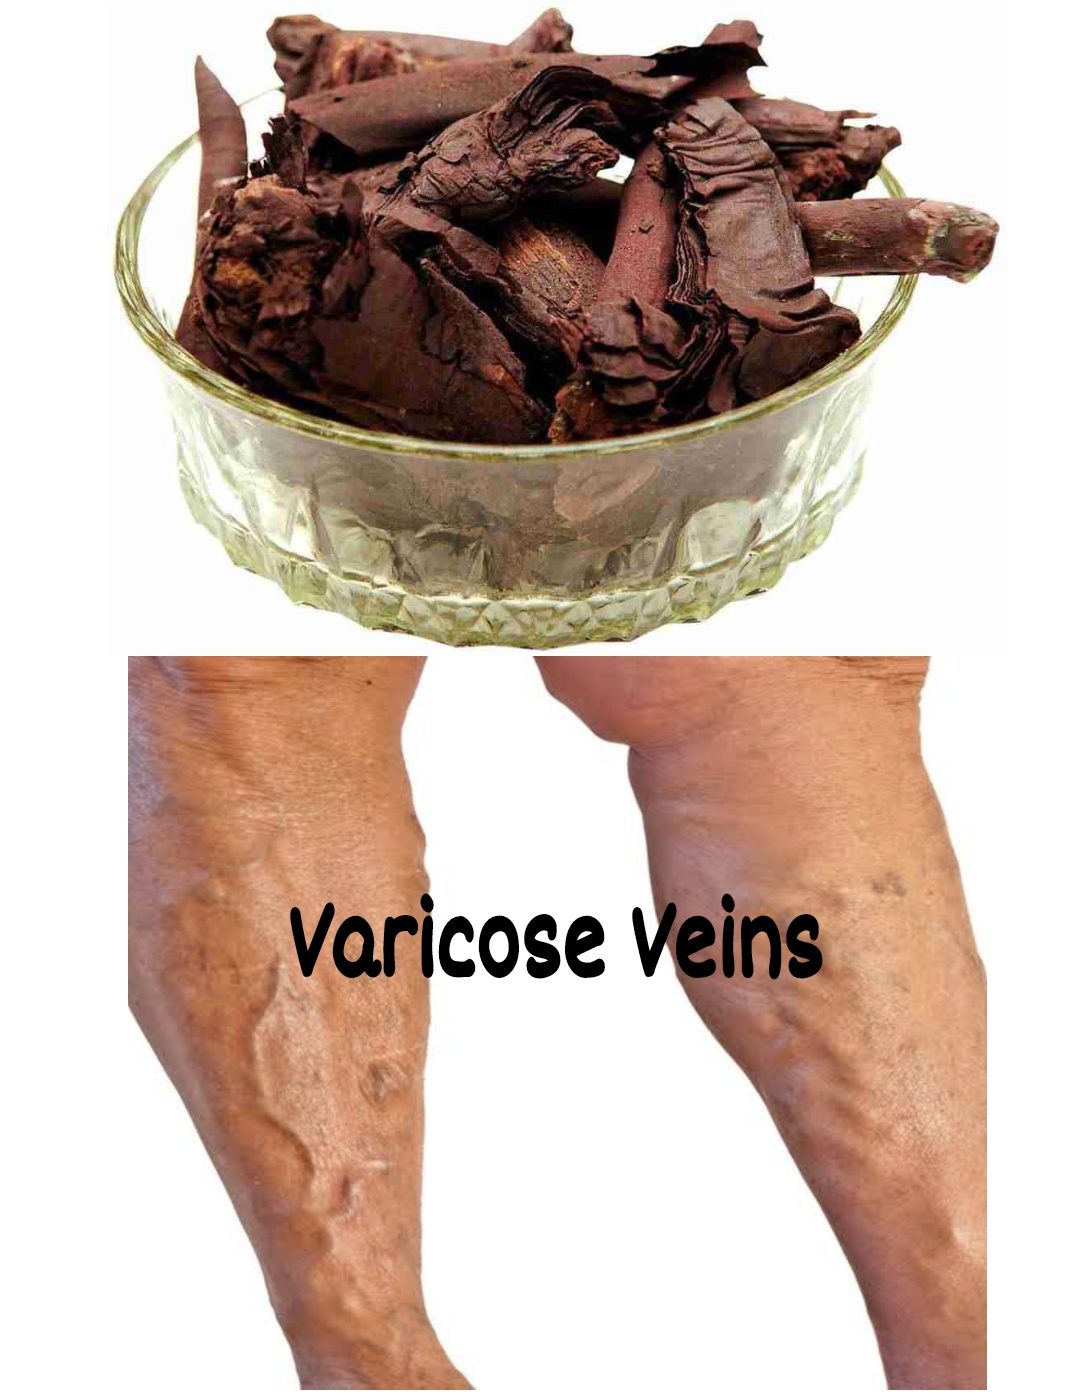 How To Use Ratanjot For Varicose Veins Athletes